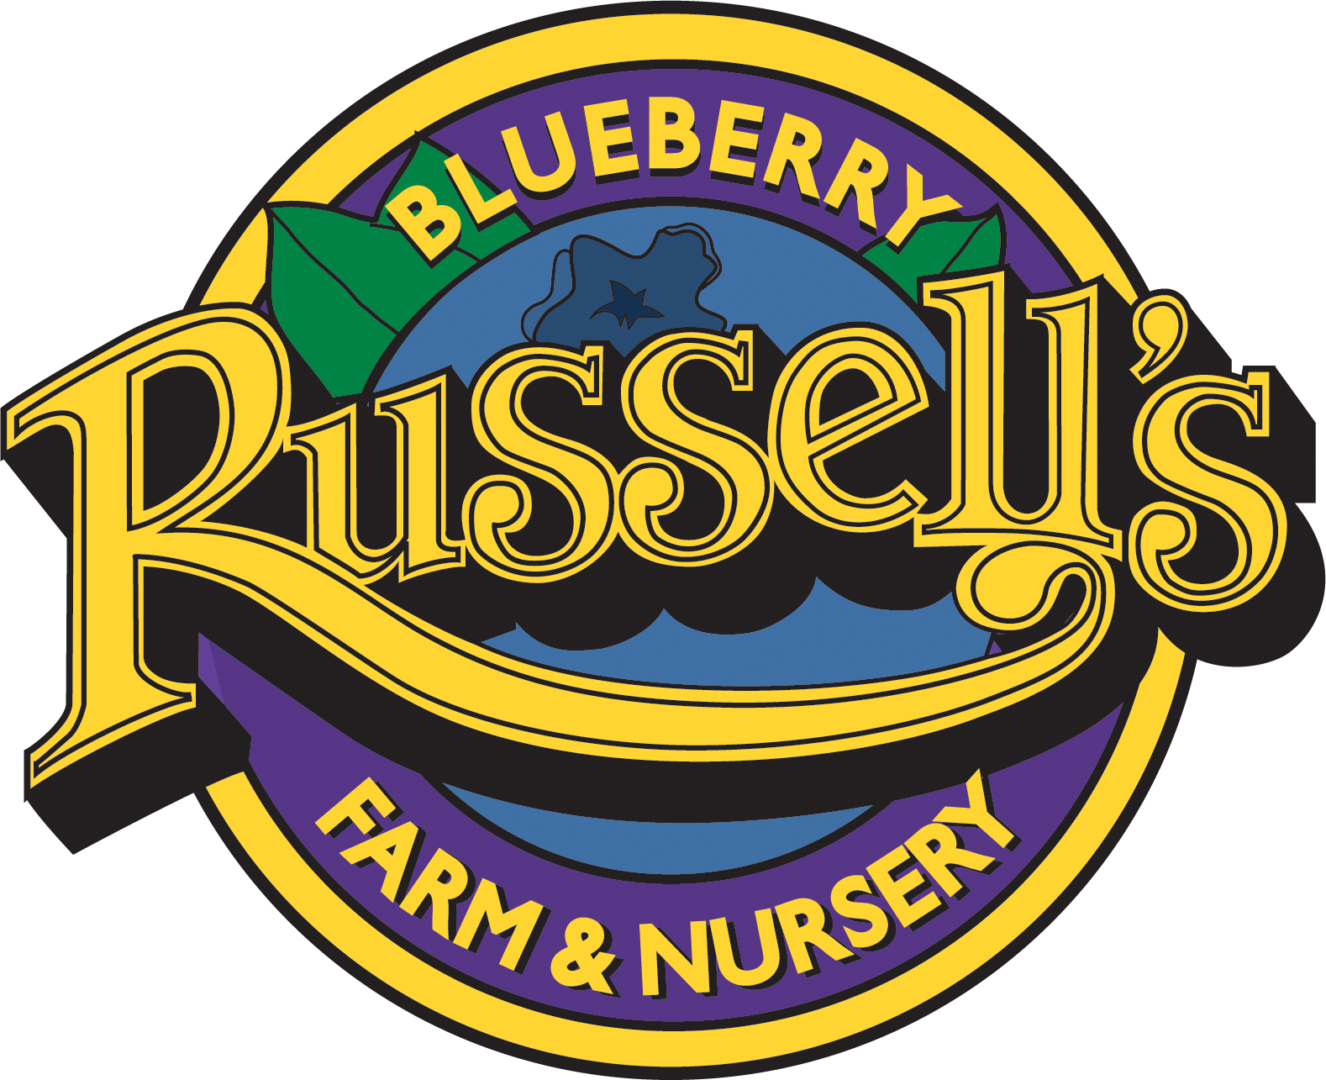 Russell's Blueberry Farm - business card logo